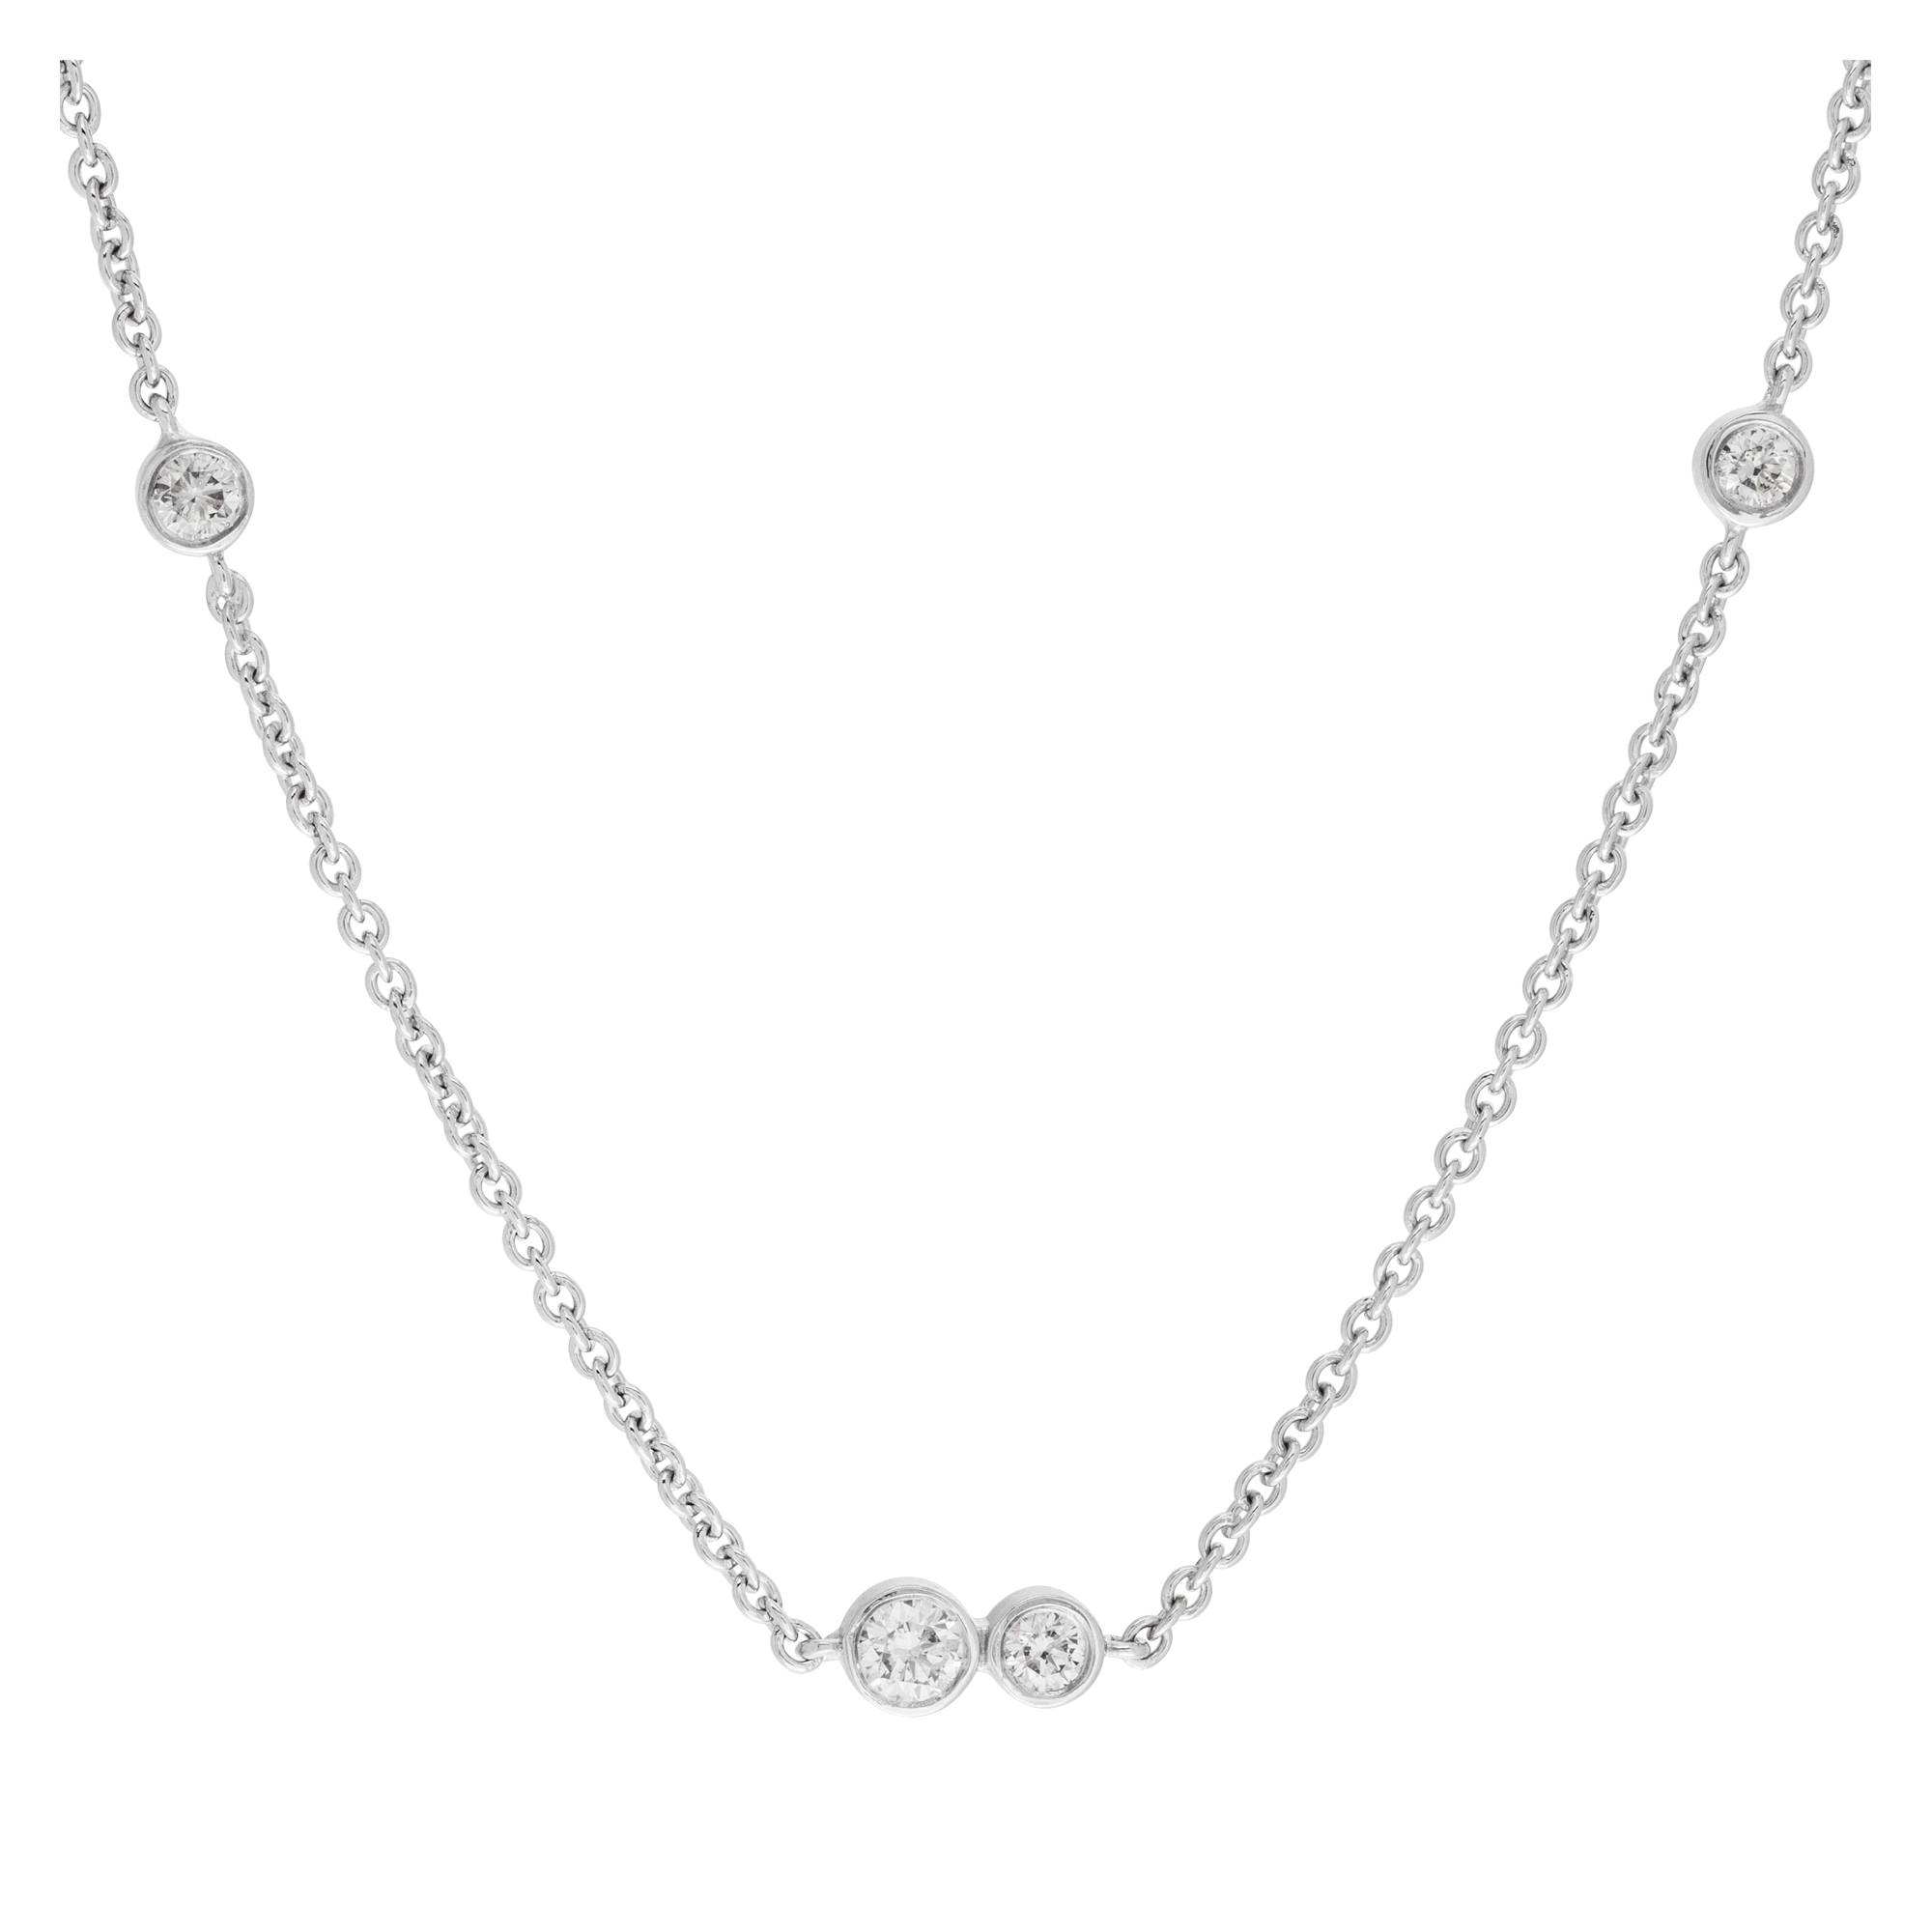 "Diamonds by the Yard" 18 inches chain with approx 1 carat total weight bezeled set, full cut round brilliant diamonds set in 18k white gold image 1